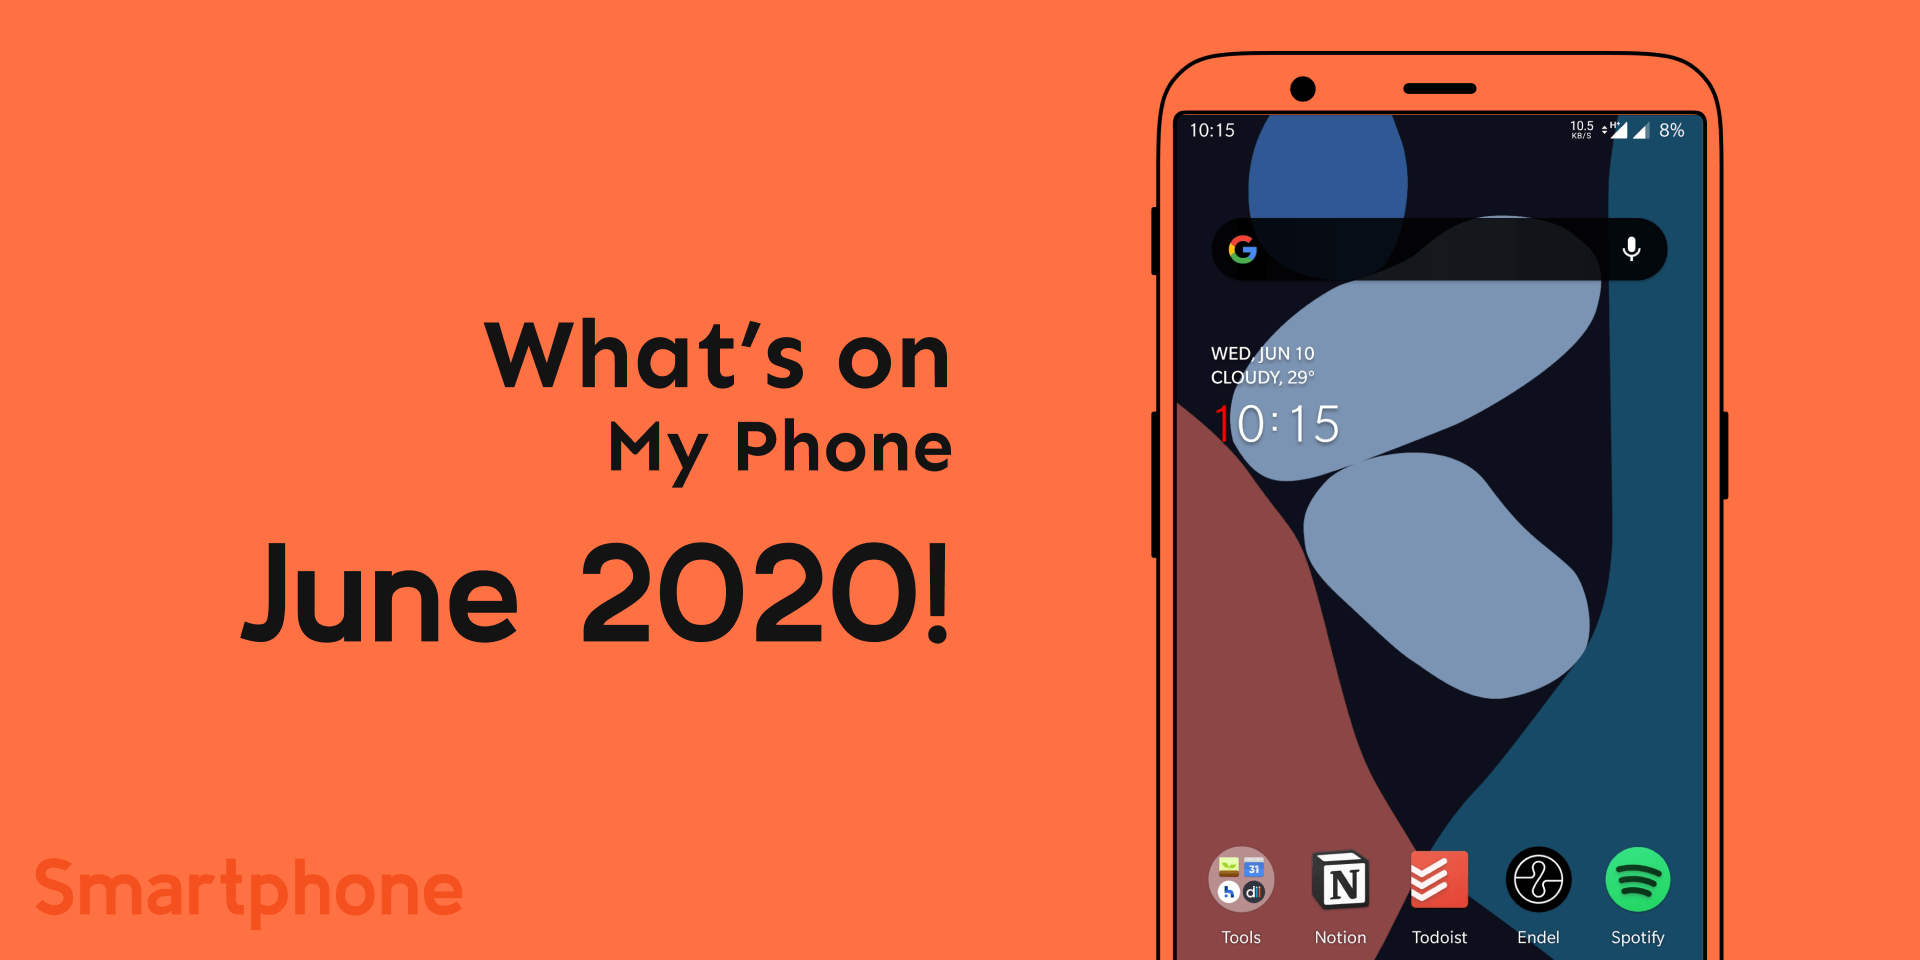 What's on My Phone June 2020!